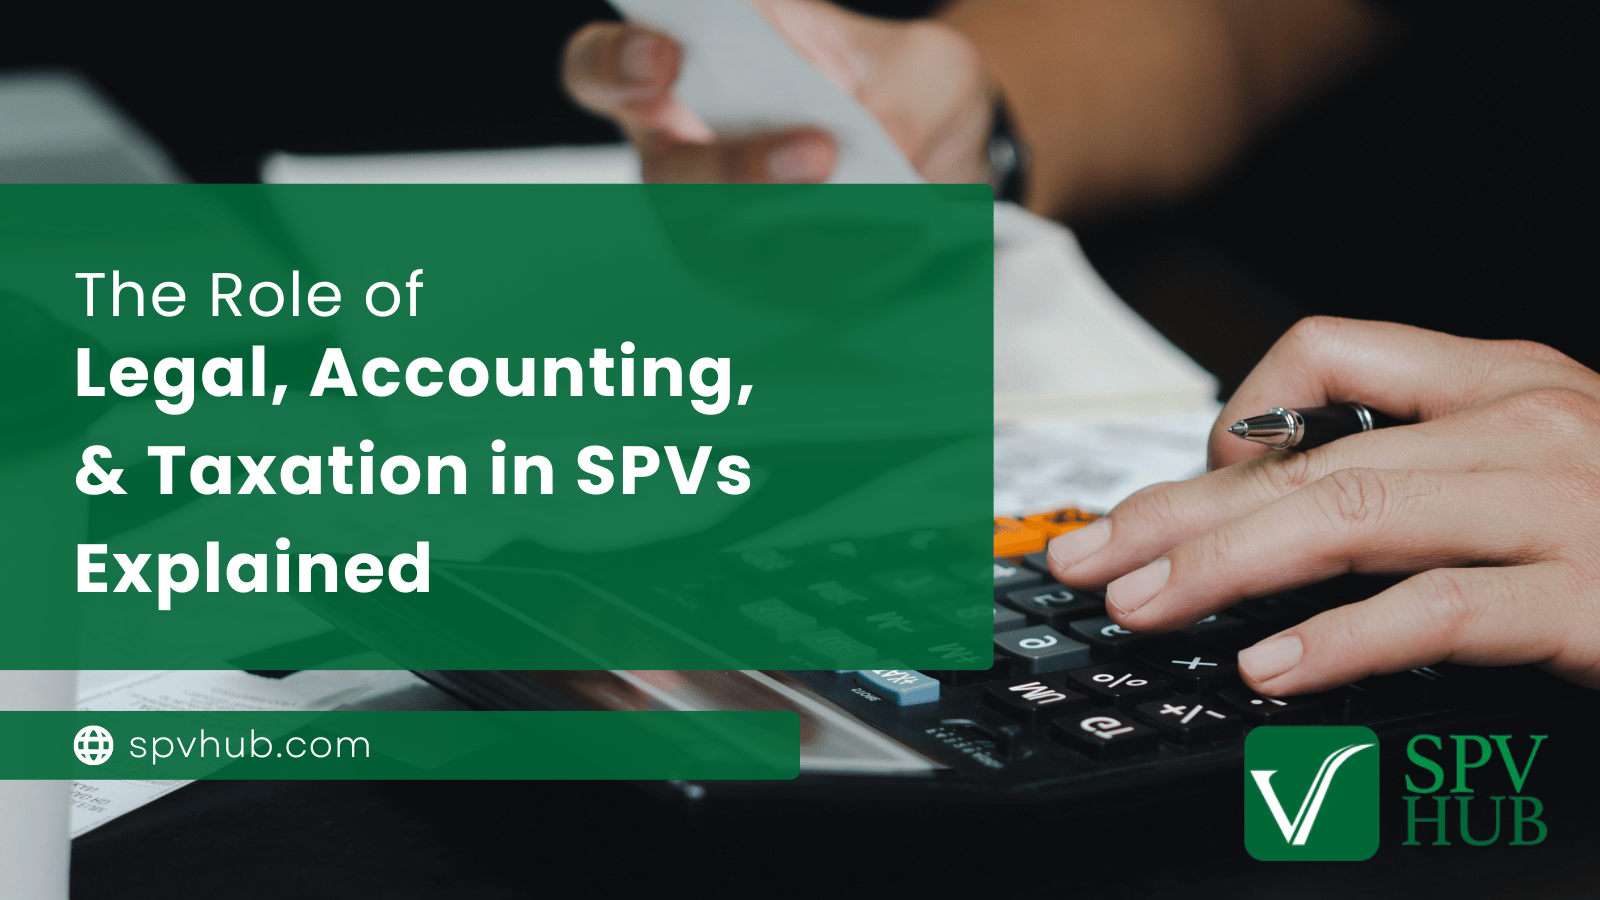 The Role of Legal, Accounting, and Taxation in SPVs Explained